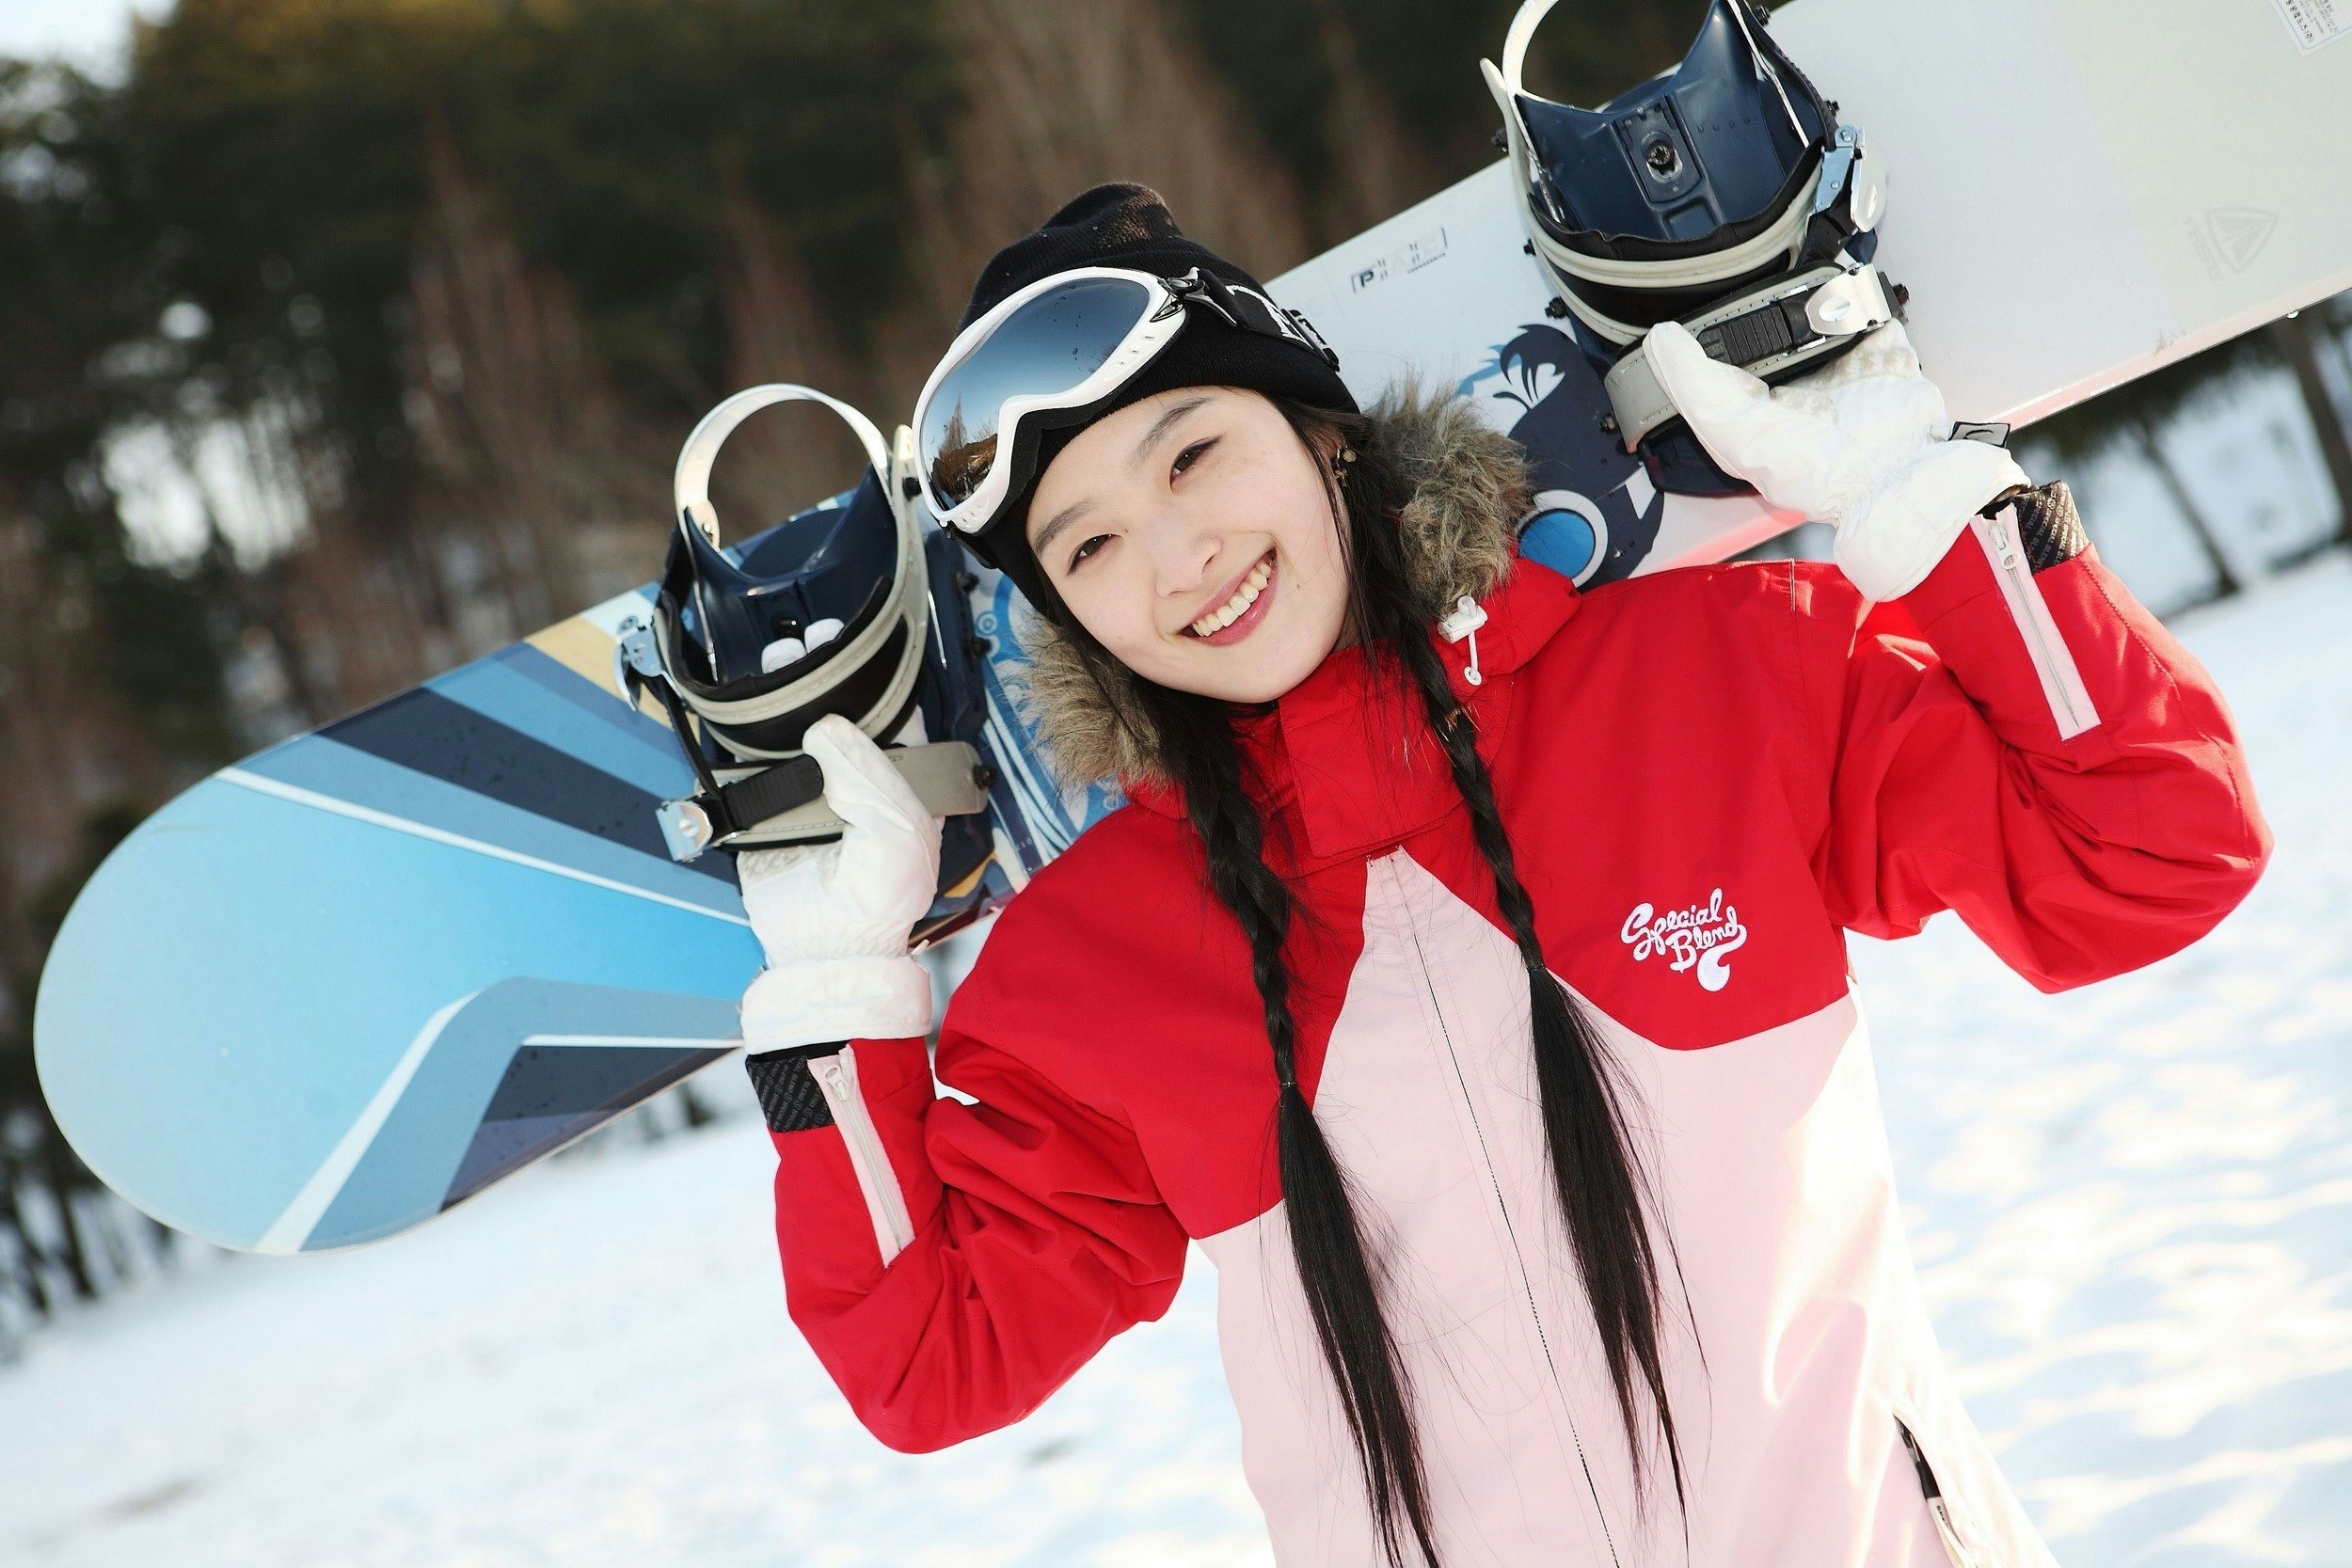 Chinese winter sports enthusiasts now seek out new experiences in Japan, the U.S., and Canada. Image: Shutterstock